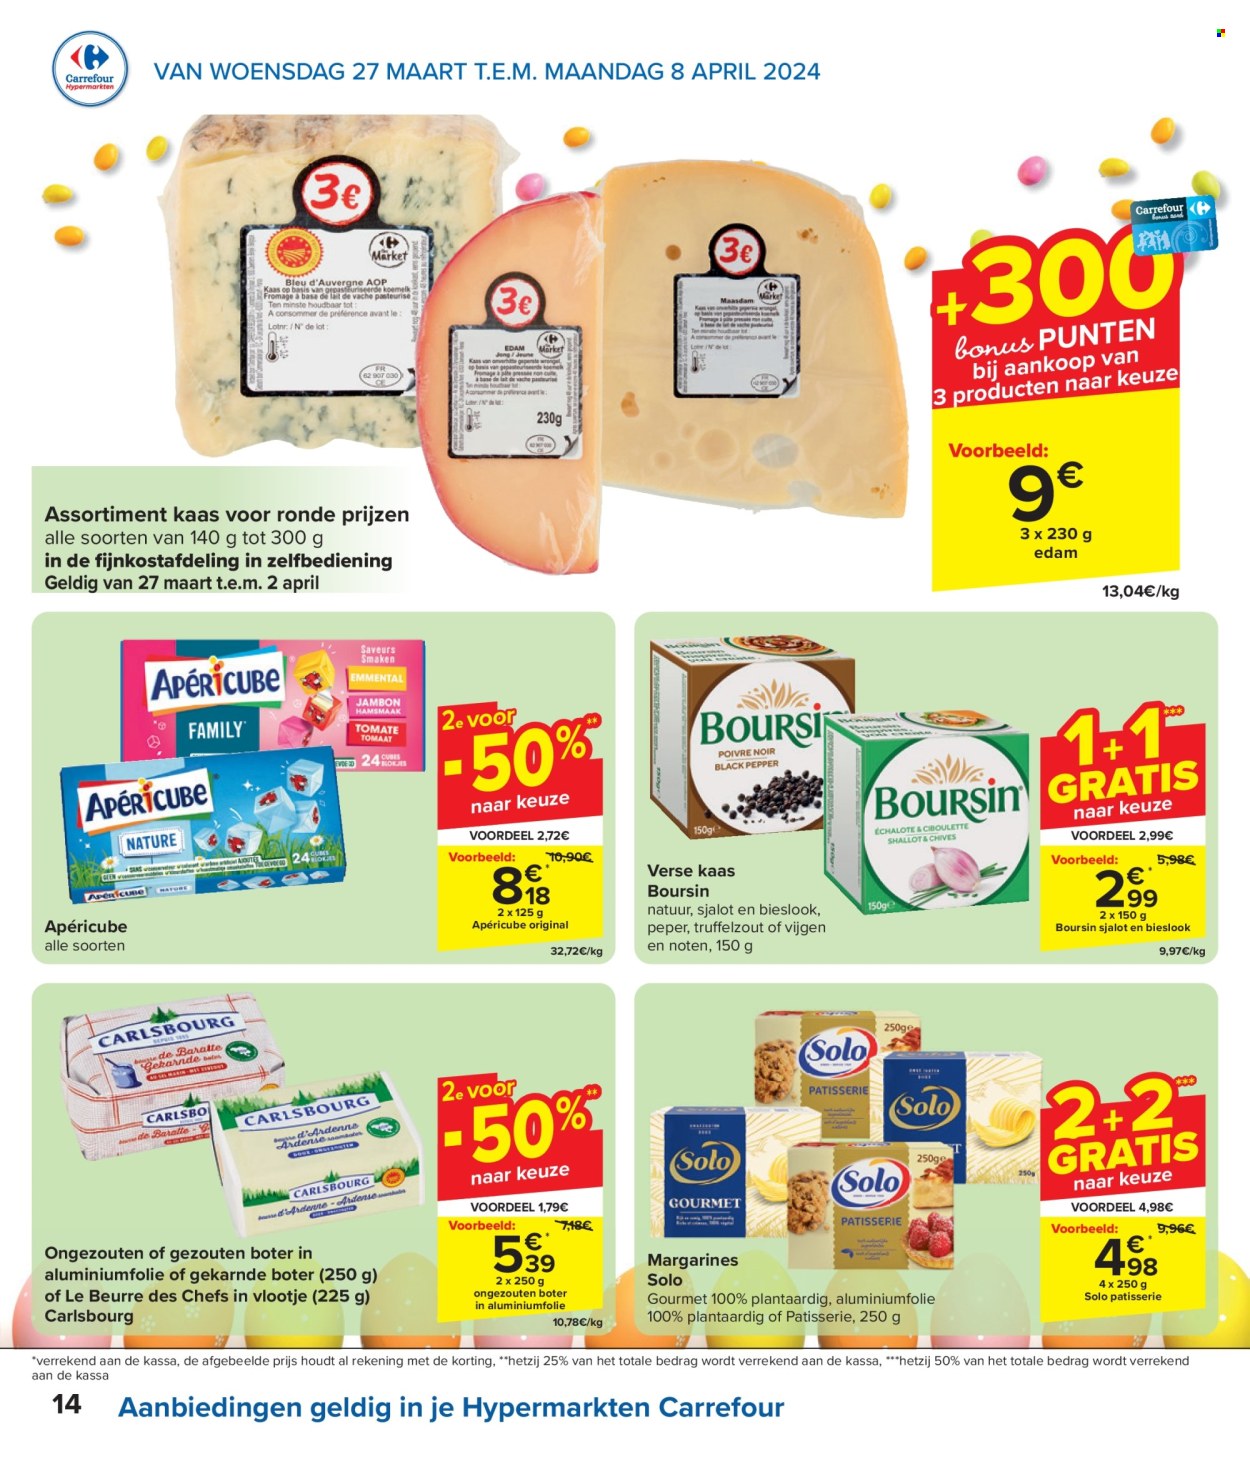 Catalogue Carrefour hypermarkt - 27.3.2024 - 8.4.2024. Page 14.